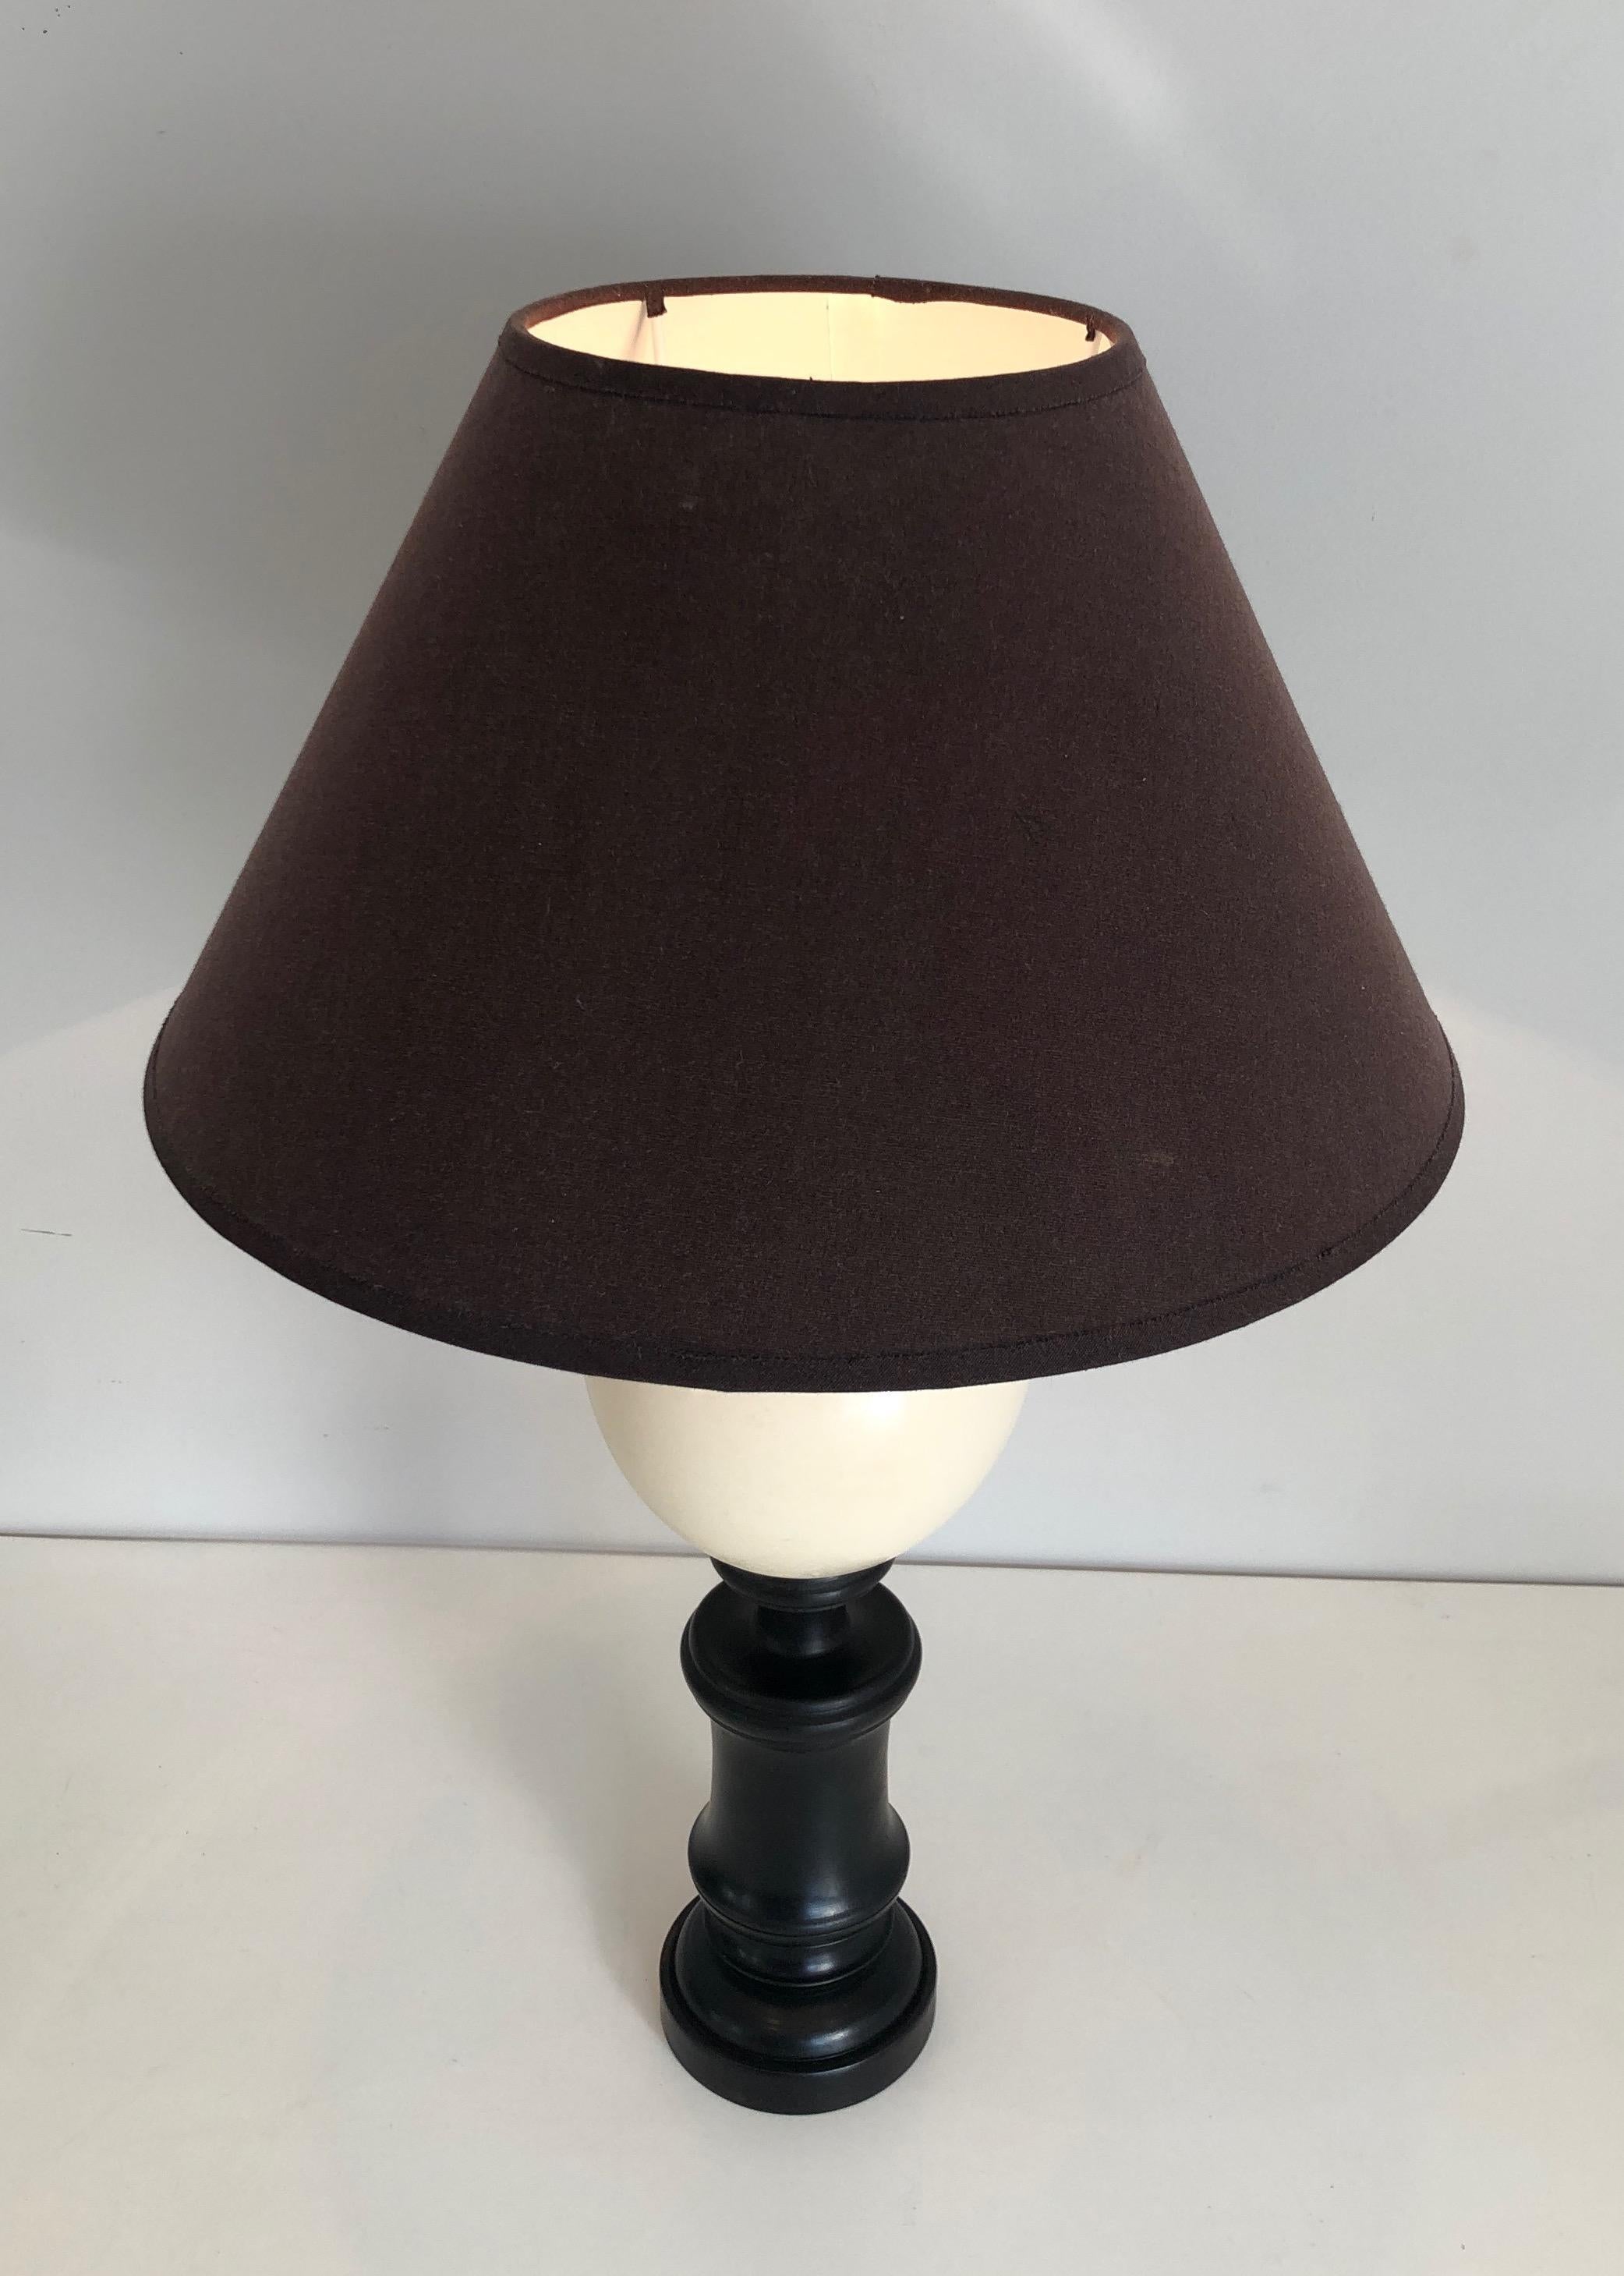 Blackened Wood and Ostrich Eggshell Table Lamp, French Work, Circa 1970 In Good Condition For Sale In Marcq-en-Barœul, Hauts-de-France